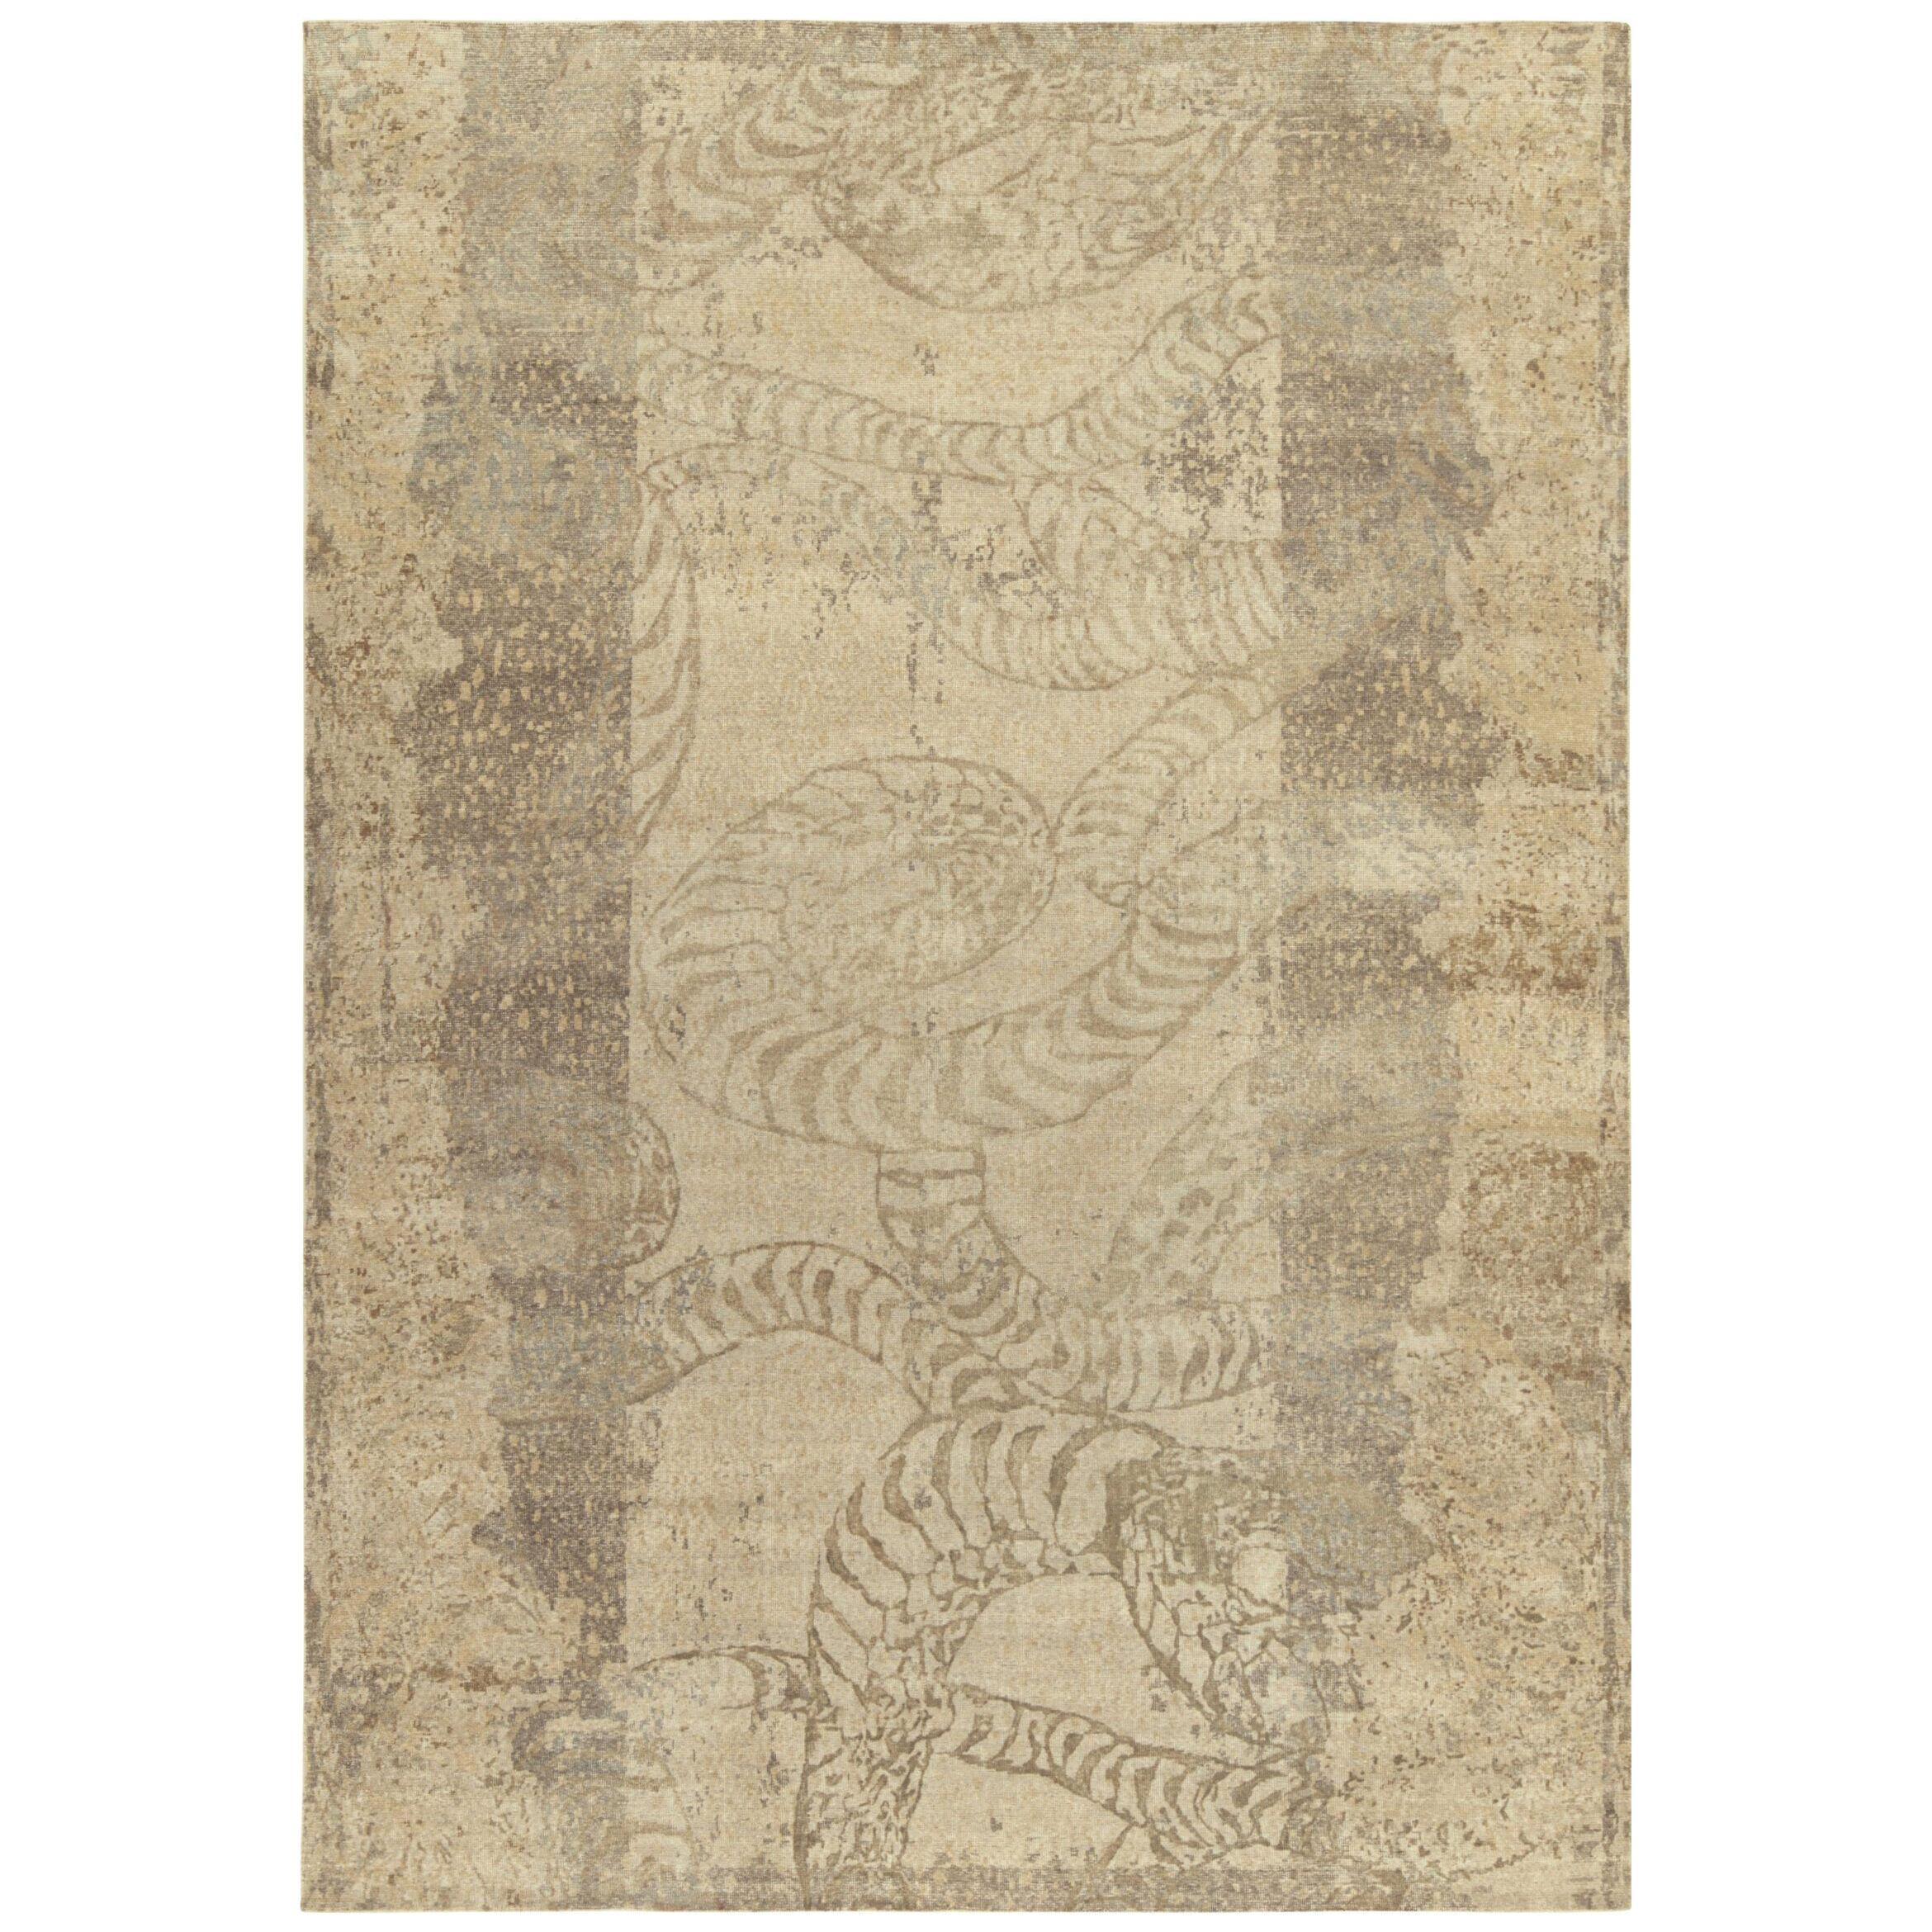 Distressed Style Abstract Rug in Beige-Brown & Gray Pattern by Rug & Kilim